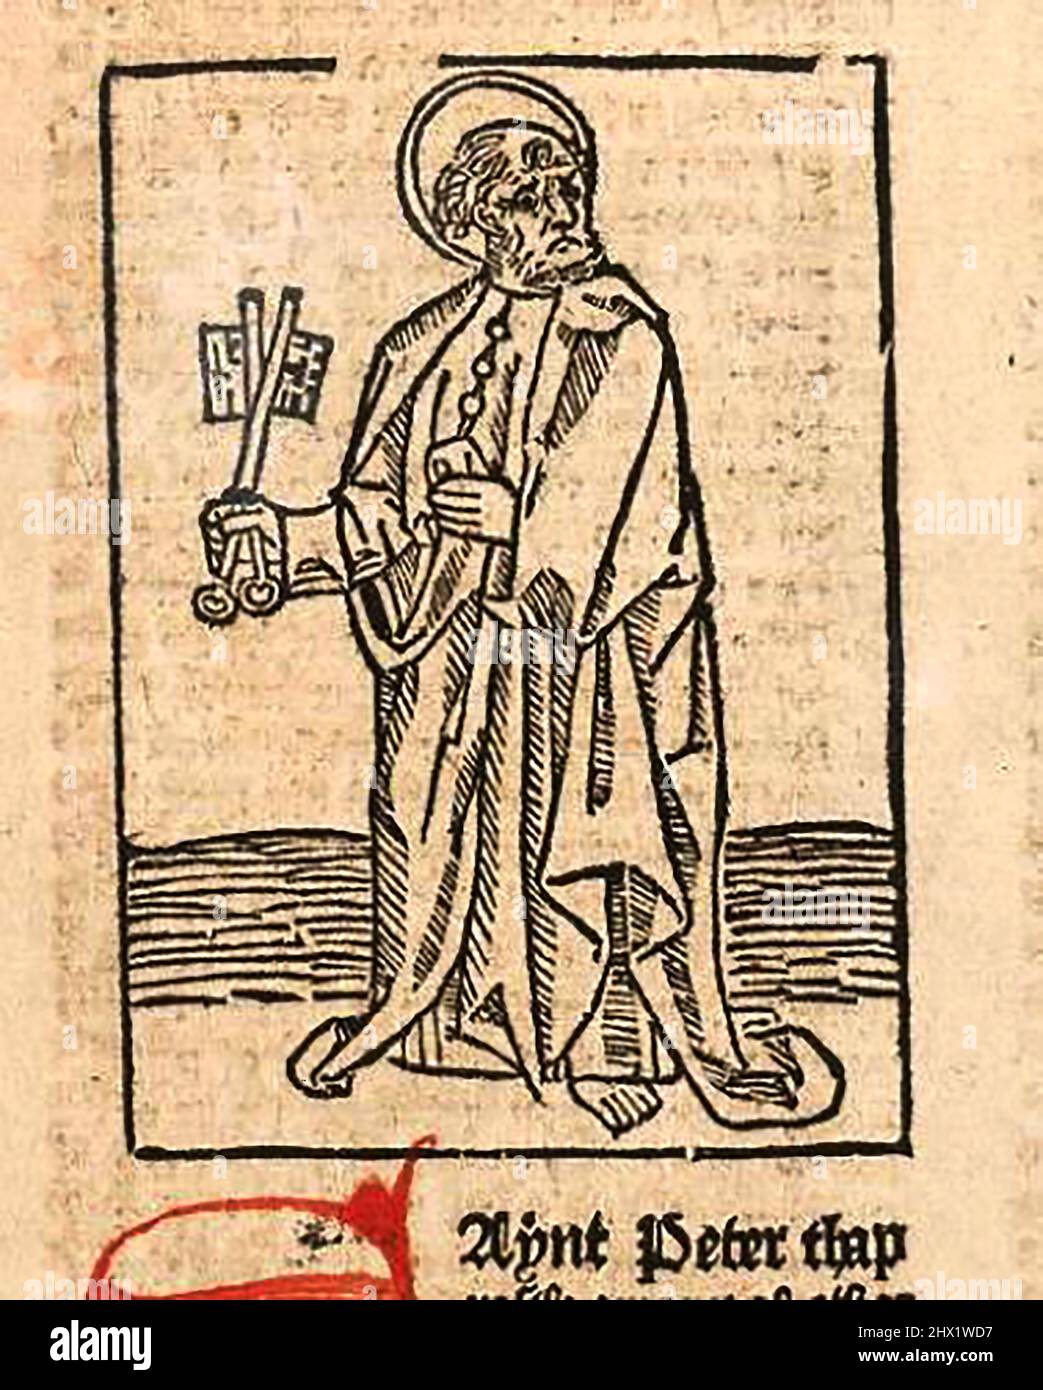 15th century woodcut showing Saint Peter with his keys as printed by William Caxton ( 1422-1491/92) in his translation of  'The Golden Legend' or  'Thus endeth the legende named in Latyn legenda aurea that is to saye in Englysshe the golden legende' by Jacobus, de Voragine, (Circa 1229-1298). Stock Photo